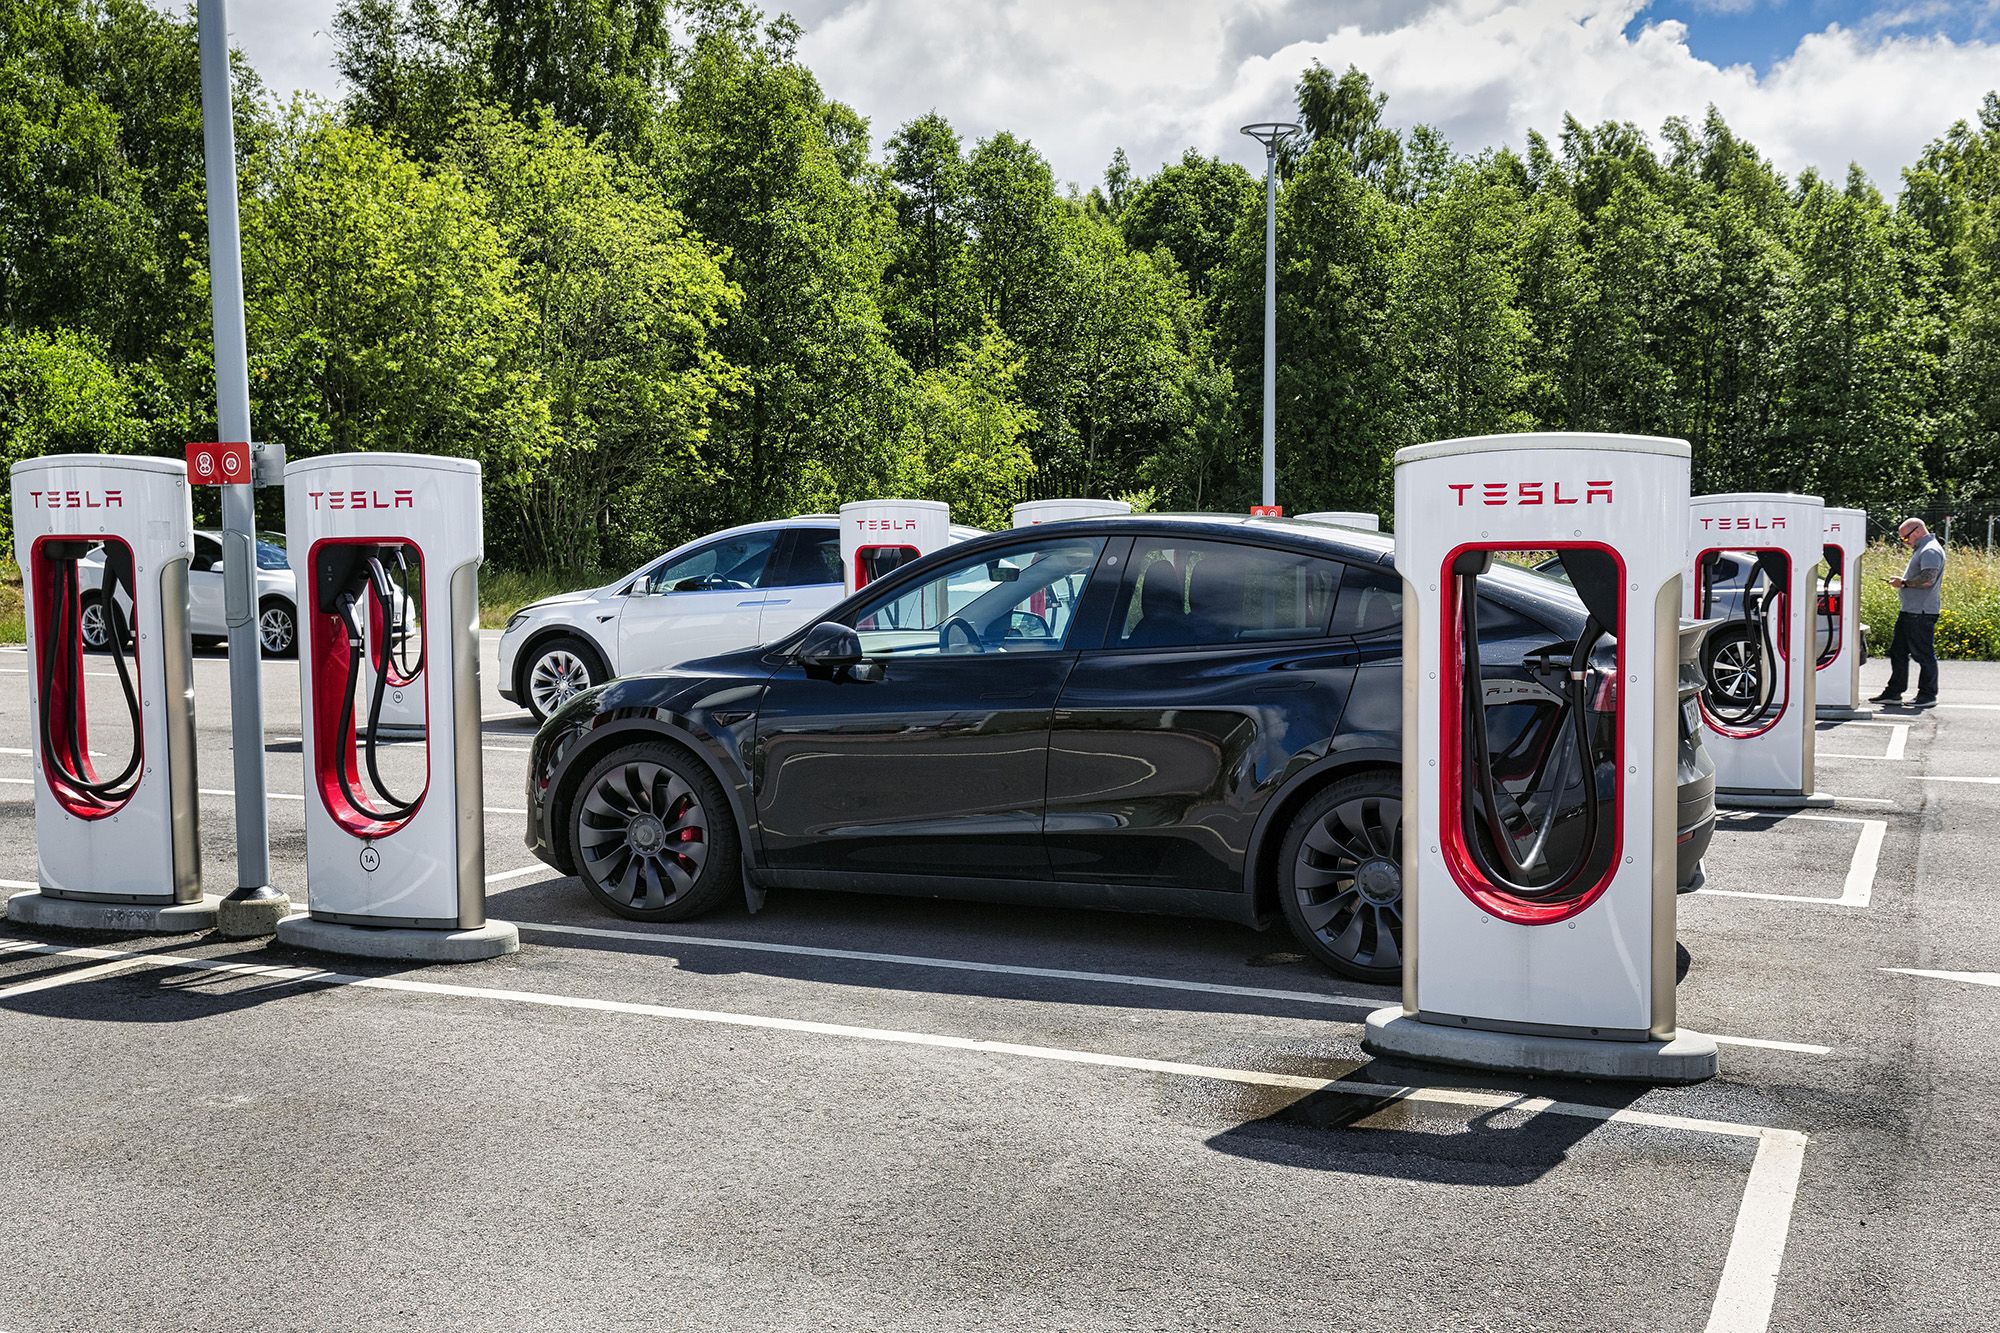 Tesla Faces New Hurdles as Swedish Unions Escalate Protests Over Wages and Conditions